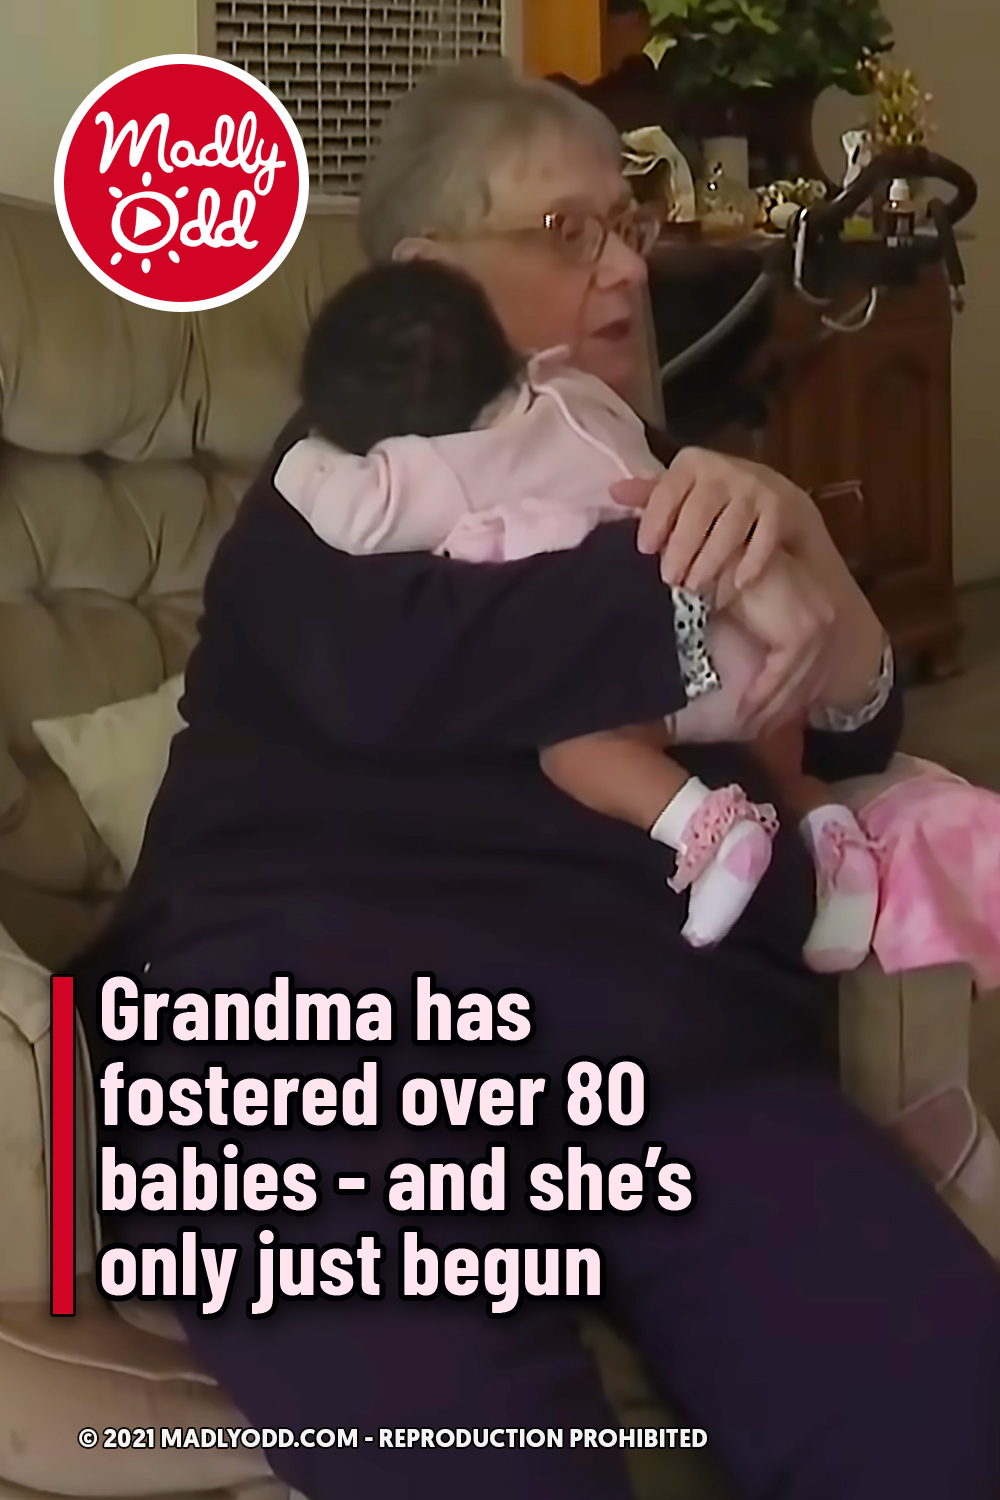 Grandma has fostered over 80 babies - and she’s only just begun